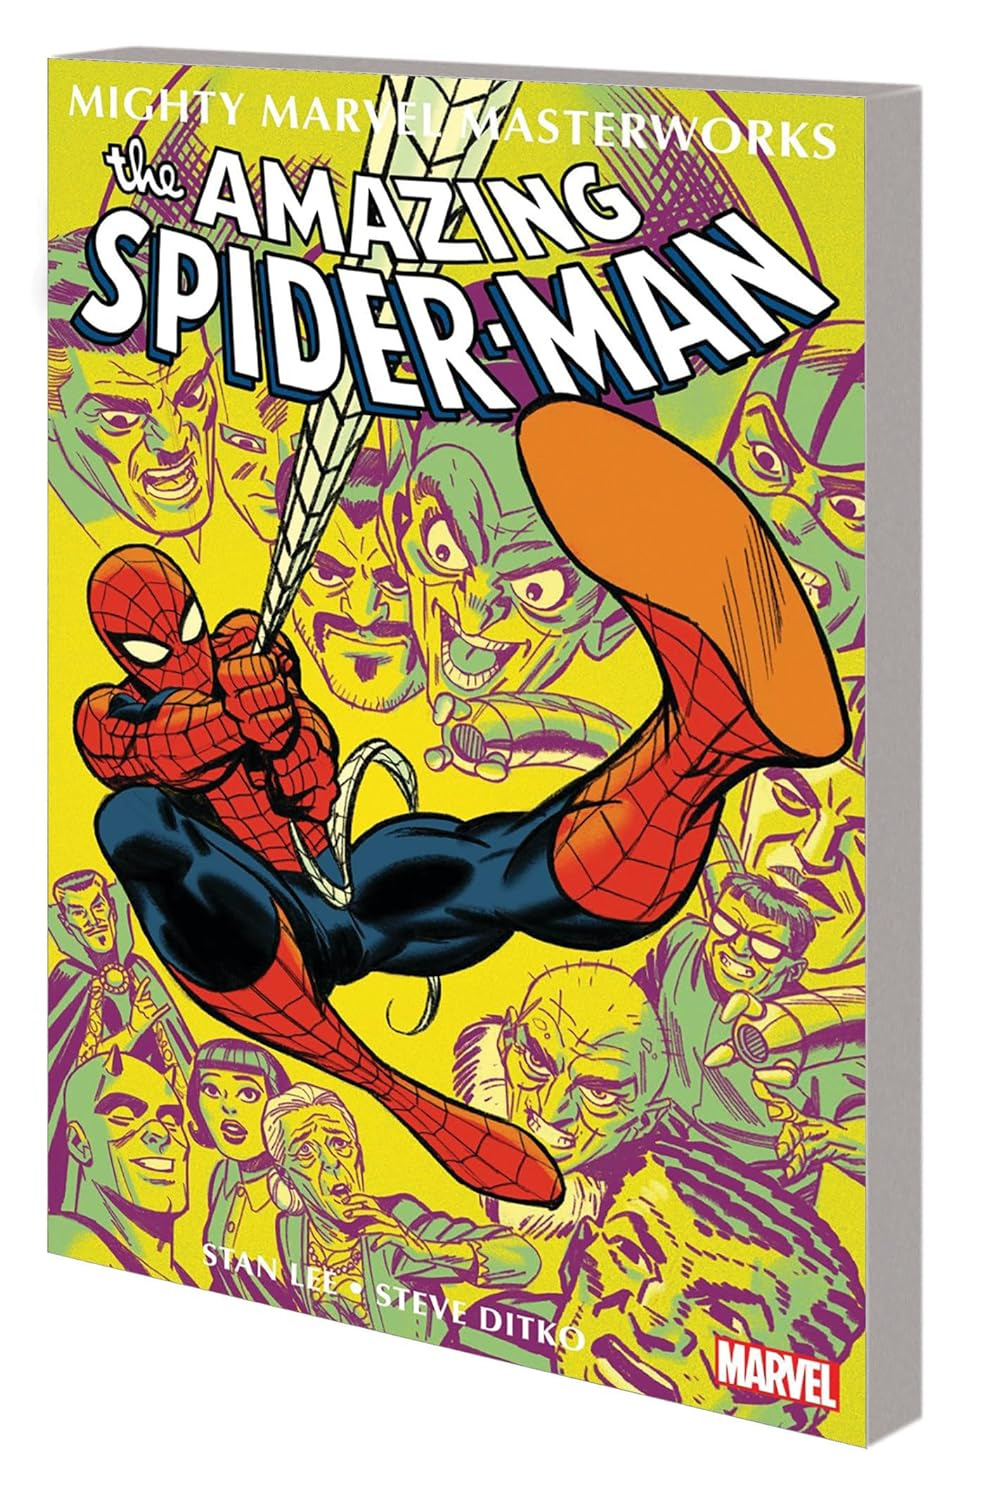 MIGHTY MARVEL MASTERWORKS: the AMAZING SPIDER-MAN VOL. 2 - the - Paperback (NEW)